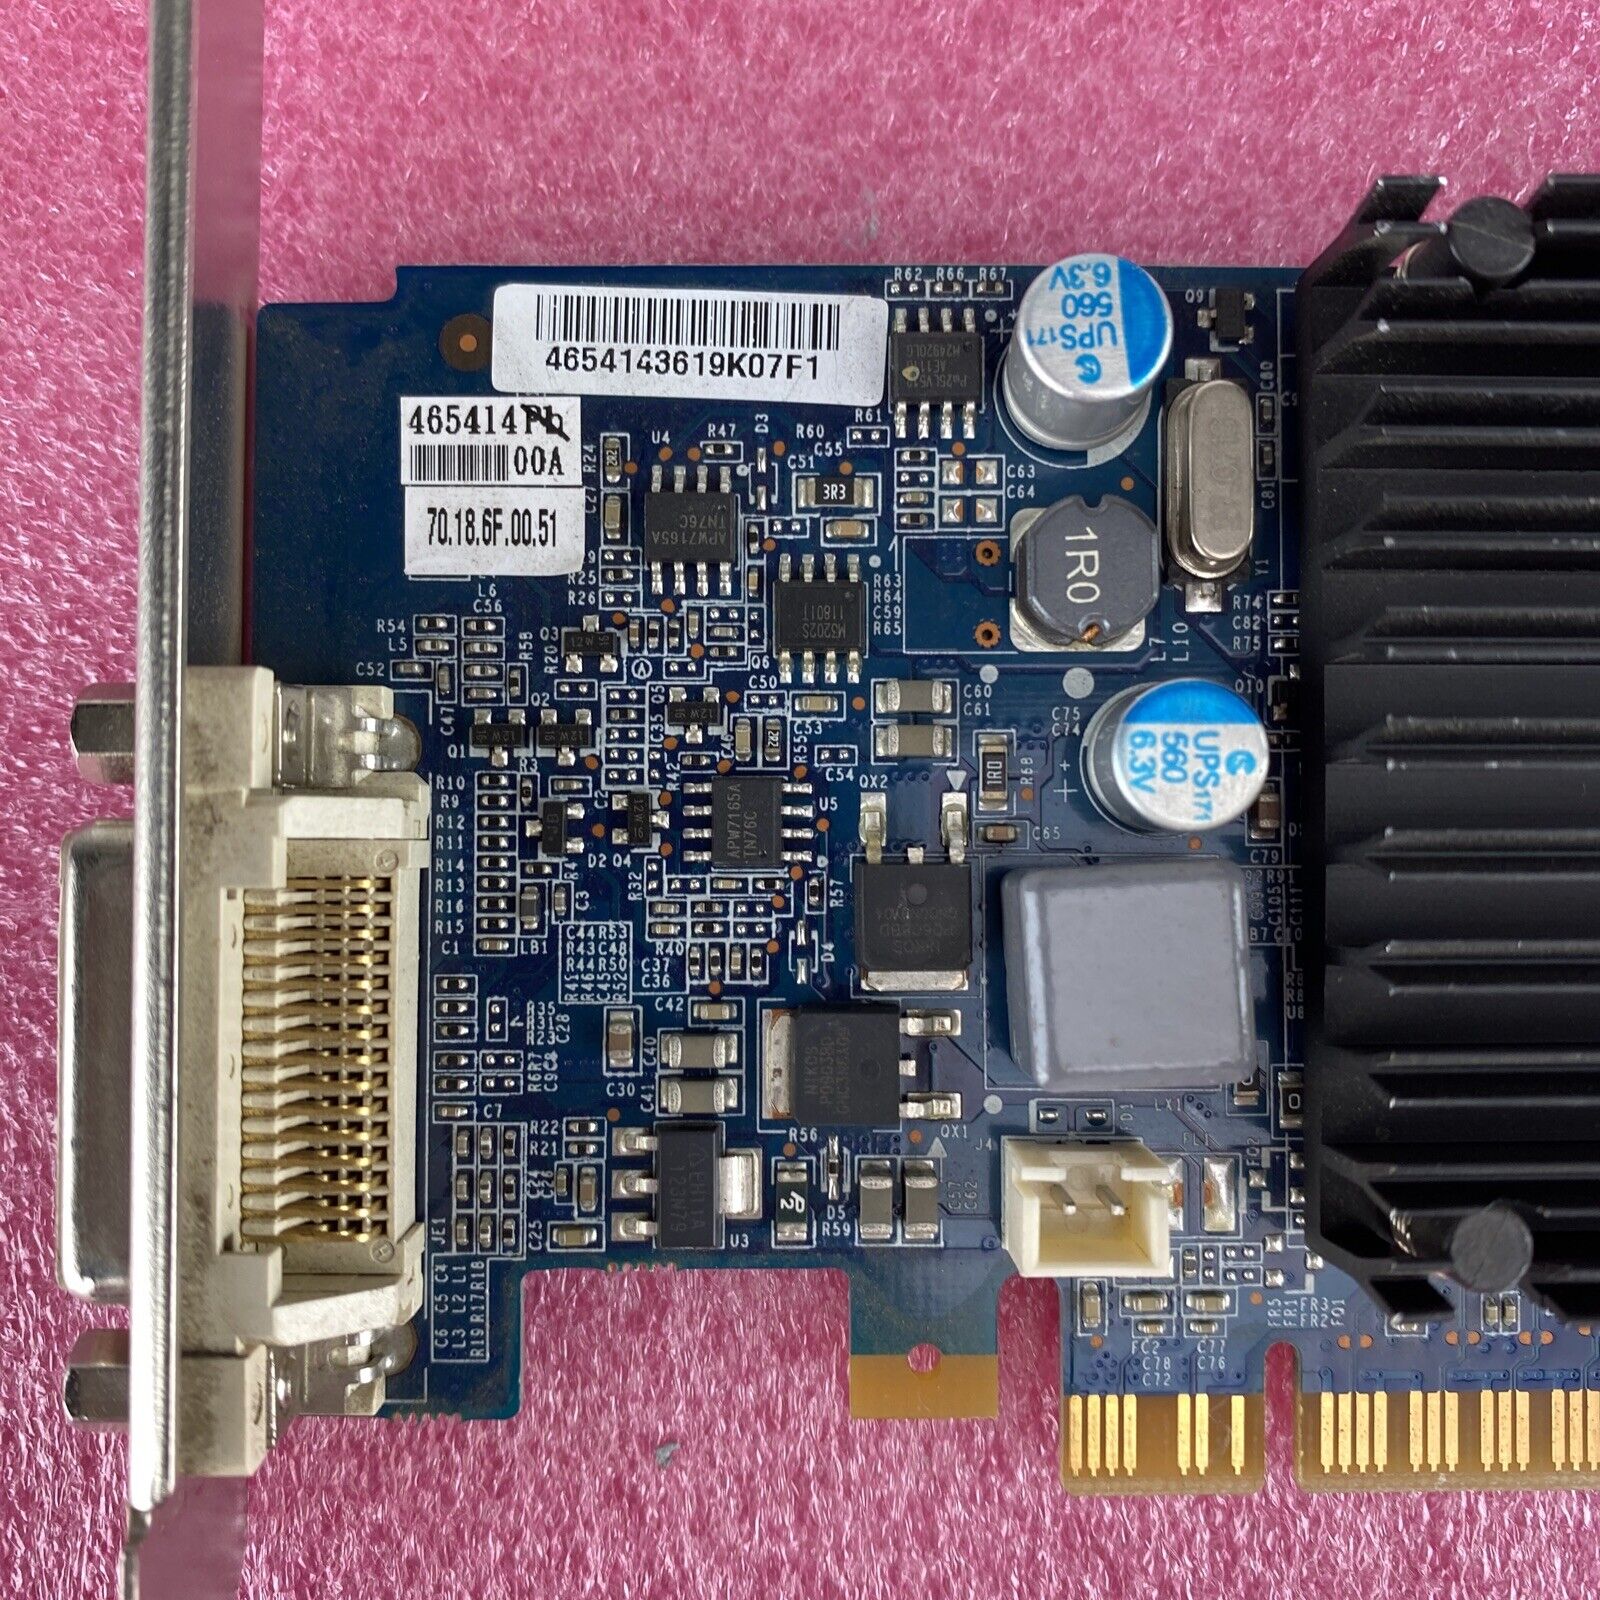 PNY VCG84DMS5R3SXPB NVIDIA GeForce 8400GS DDR2 512MB DMS-59 Video Graphics Card